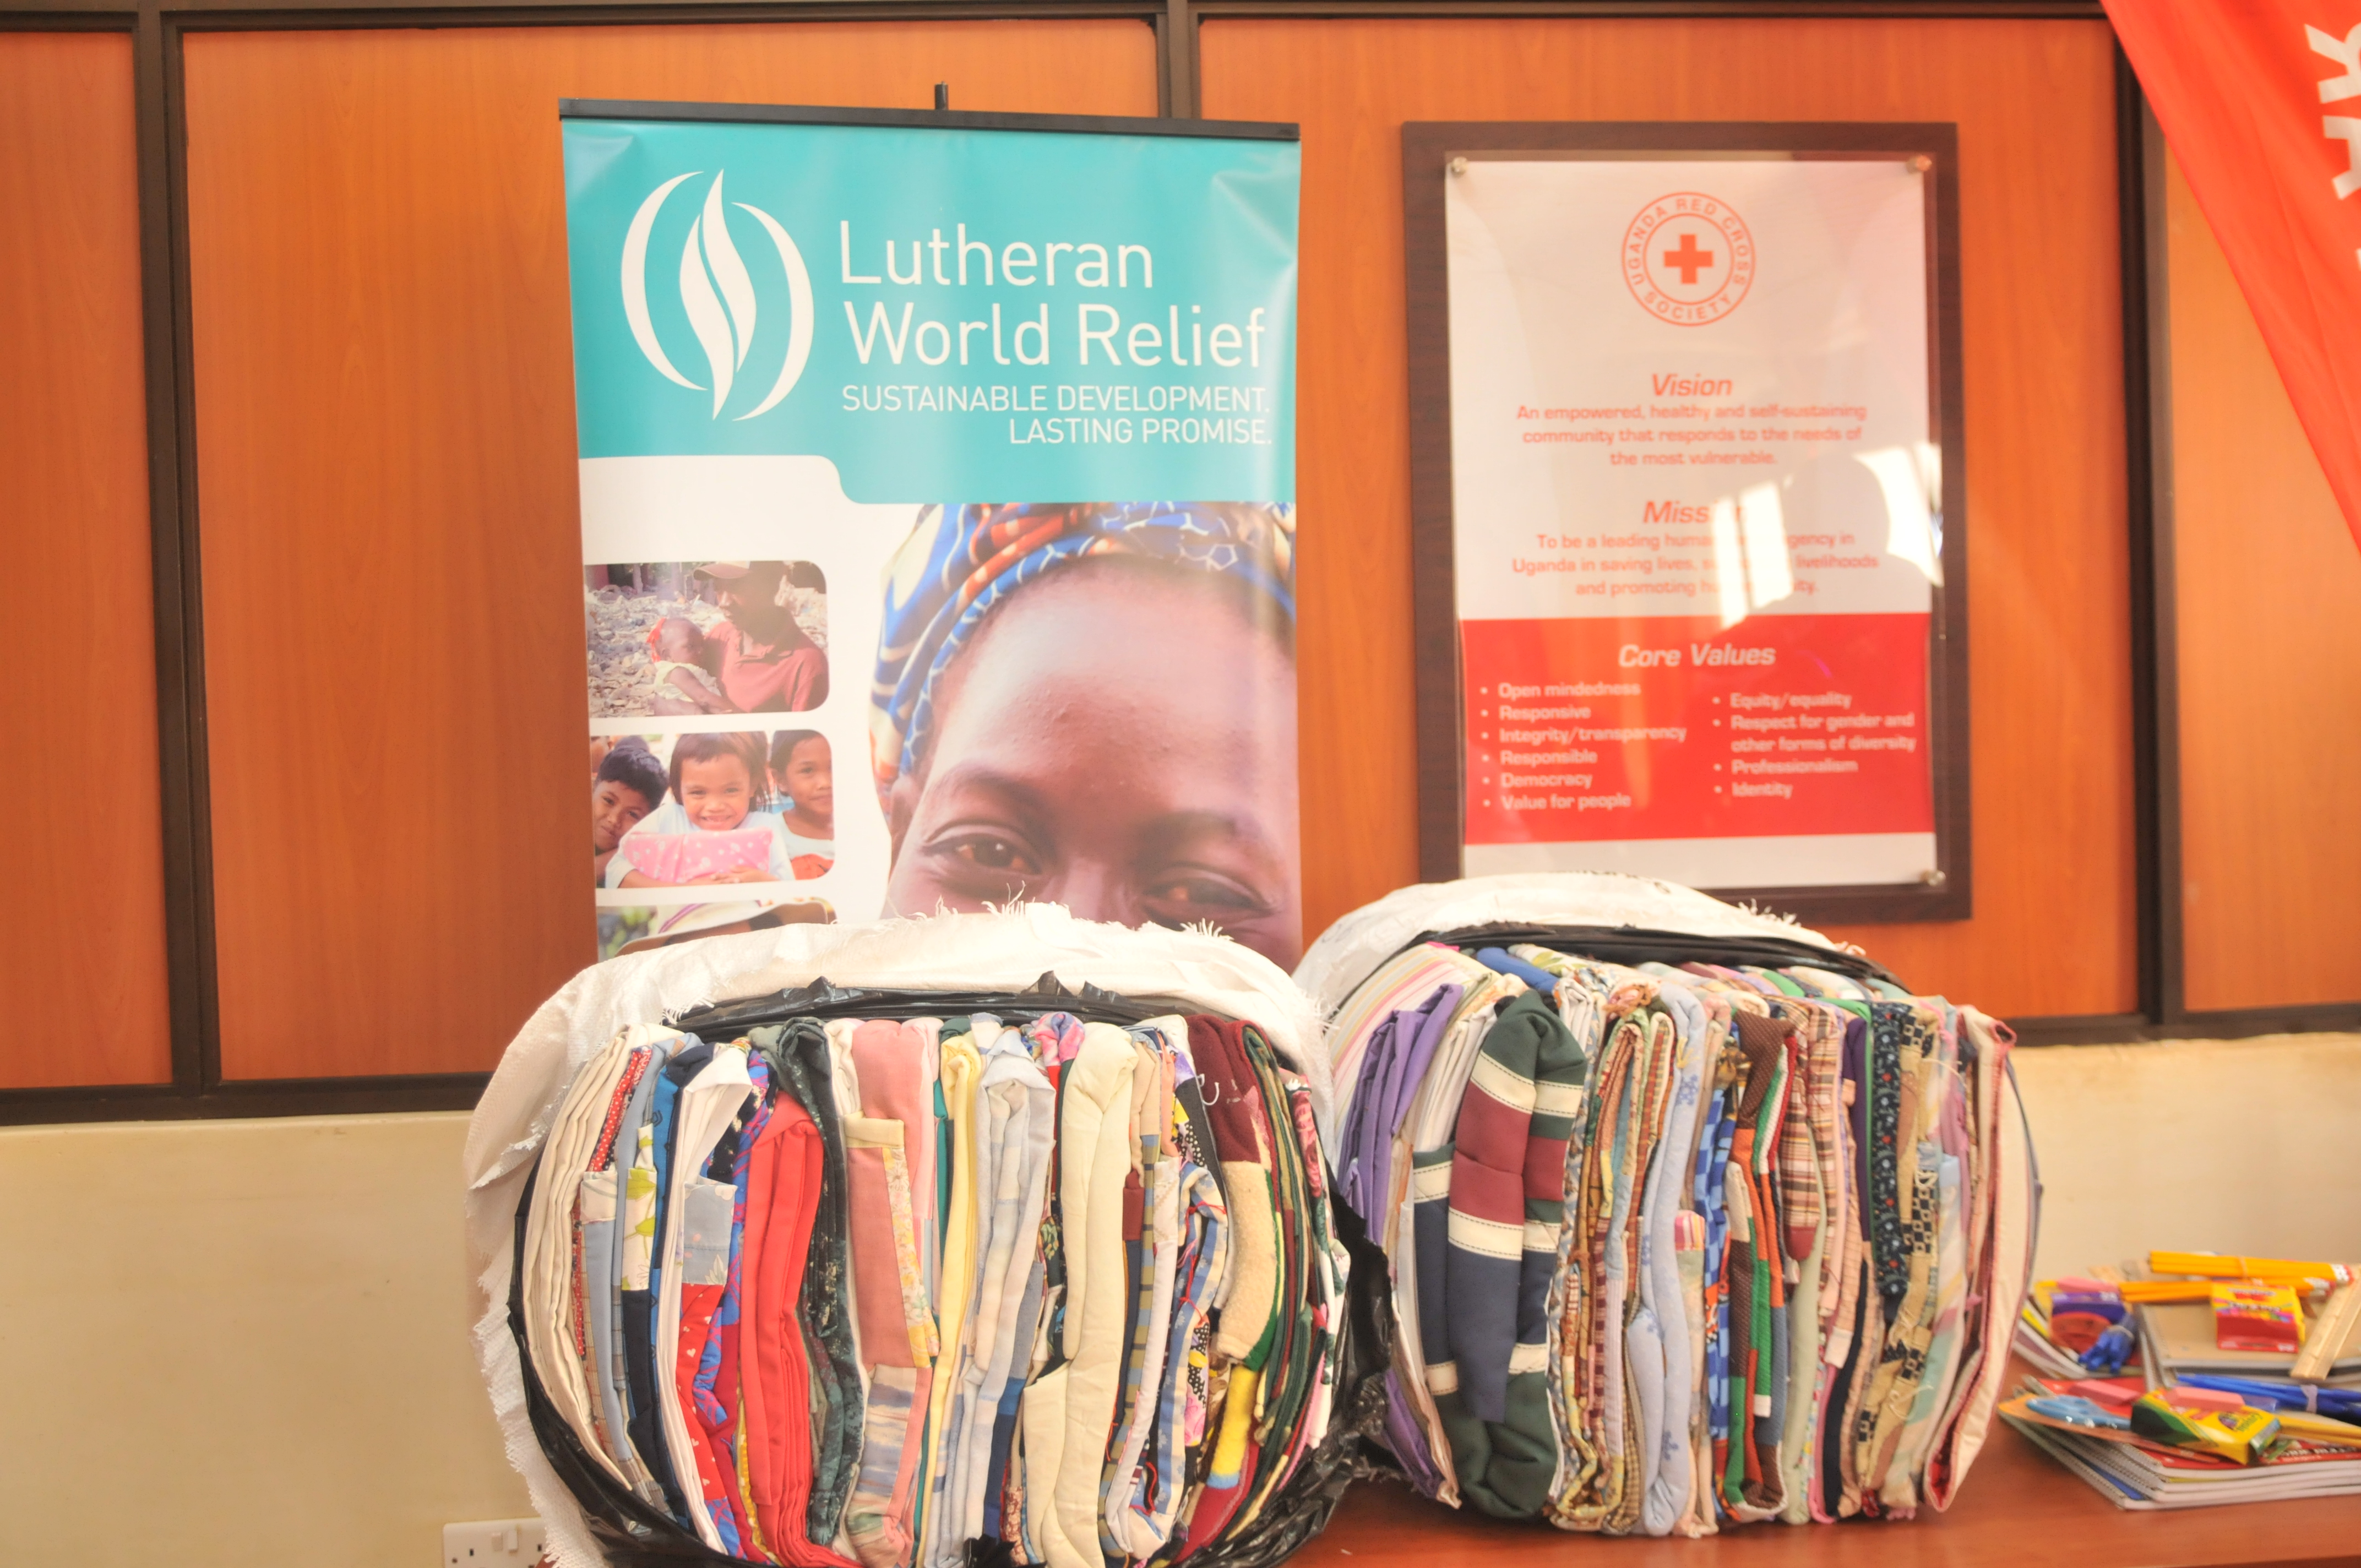 The donations handed over by Lutheran World Relief include 160 Bales of Blankets and 220 cartons of school kits